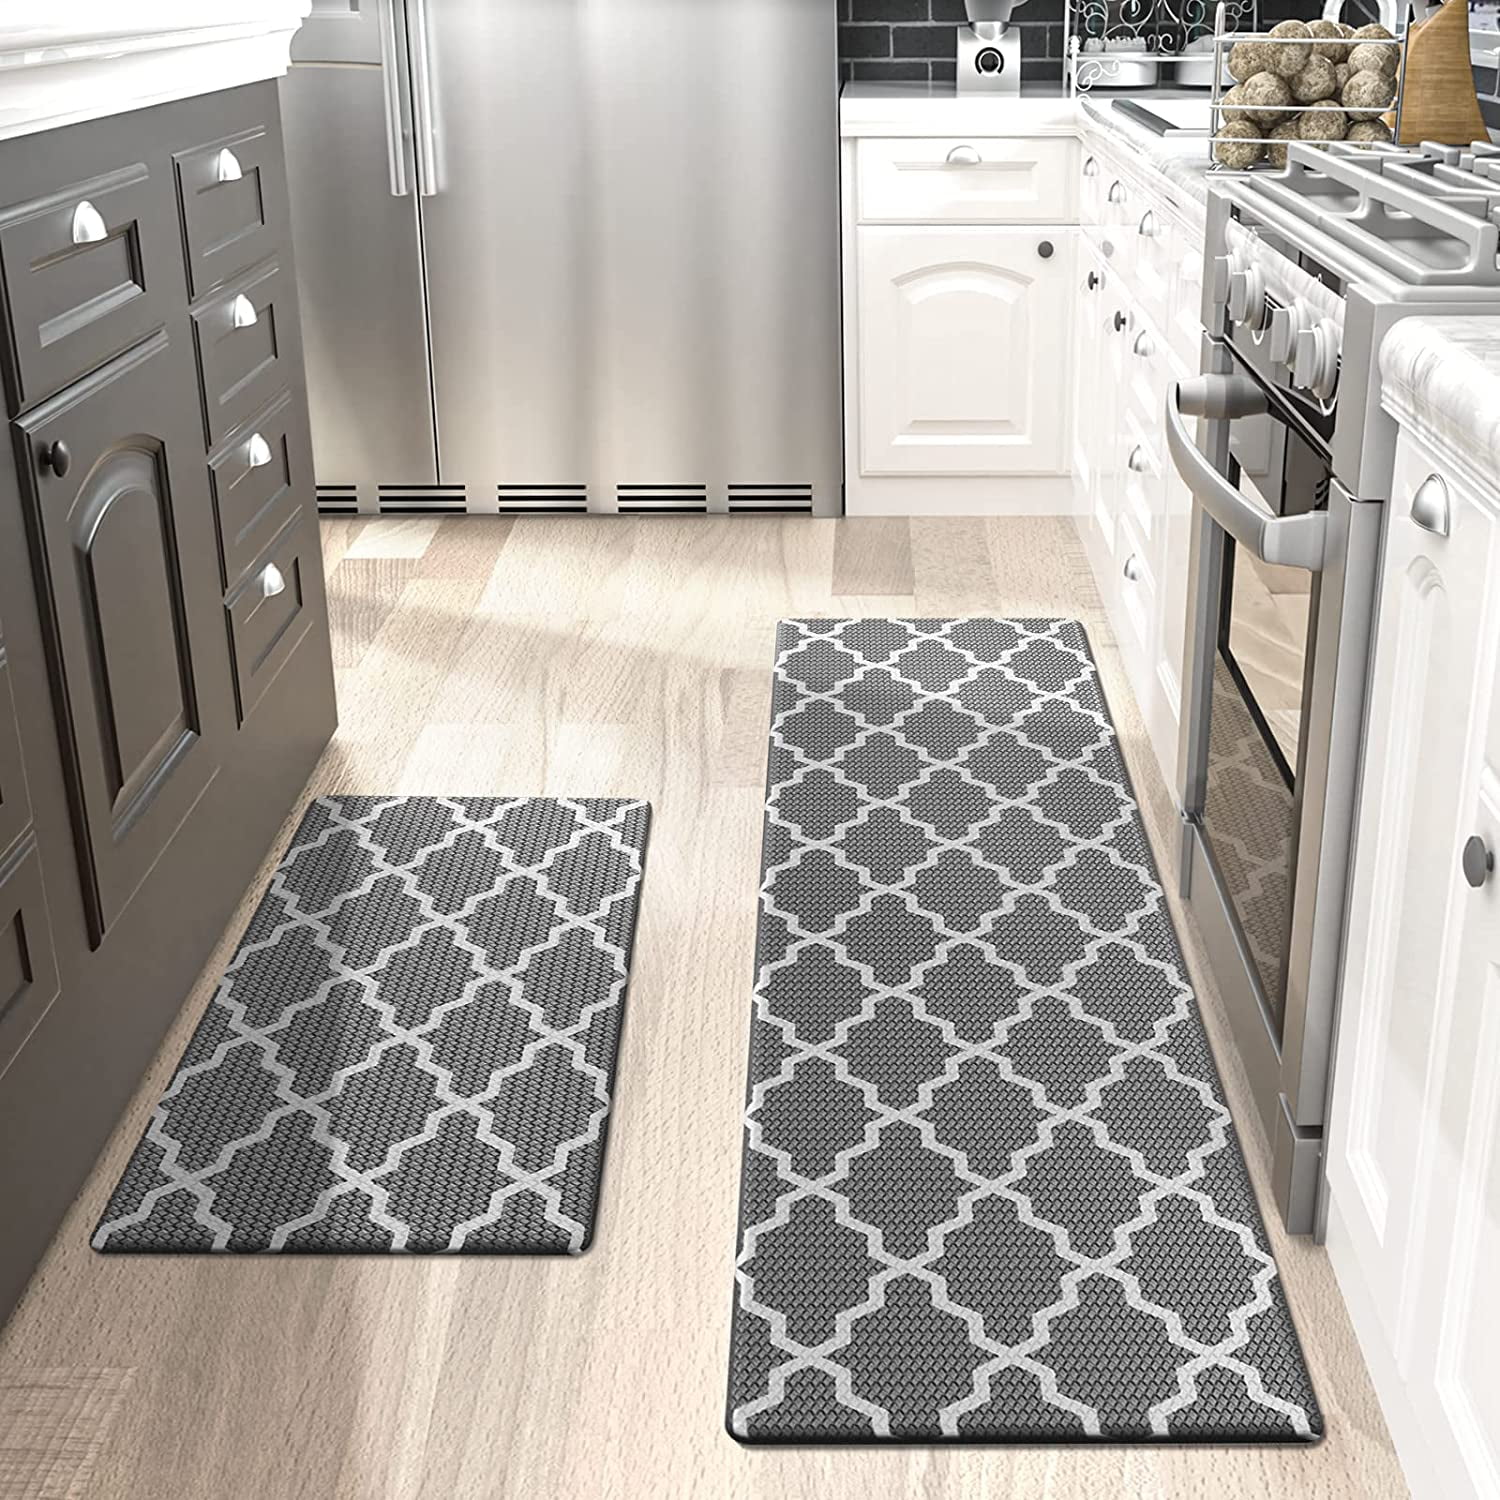 Color&Geometry Color G Kitchen Mat Set, Non Skid Kitchen Rug 2 Pieces, Kitchen Floor Runner Rug Standing Desk Mat Washable, 17 inchx29 inch+17 inchx59 inch, Gray